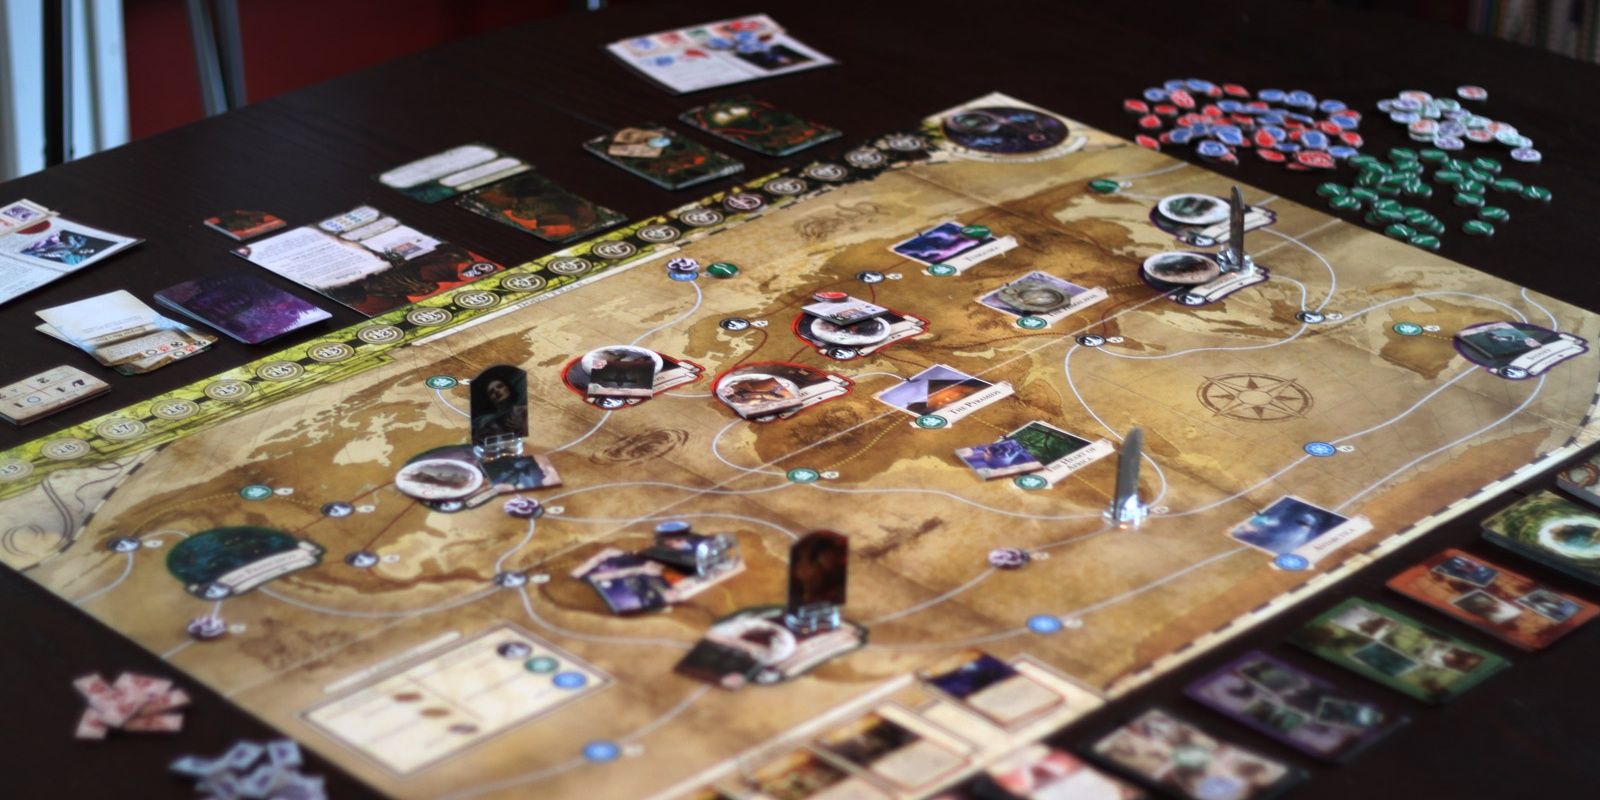 Eldritch Horror Board Game Being Played On The Table